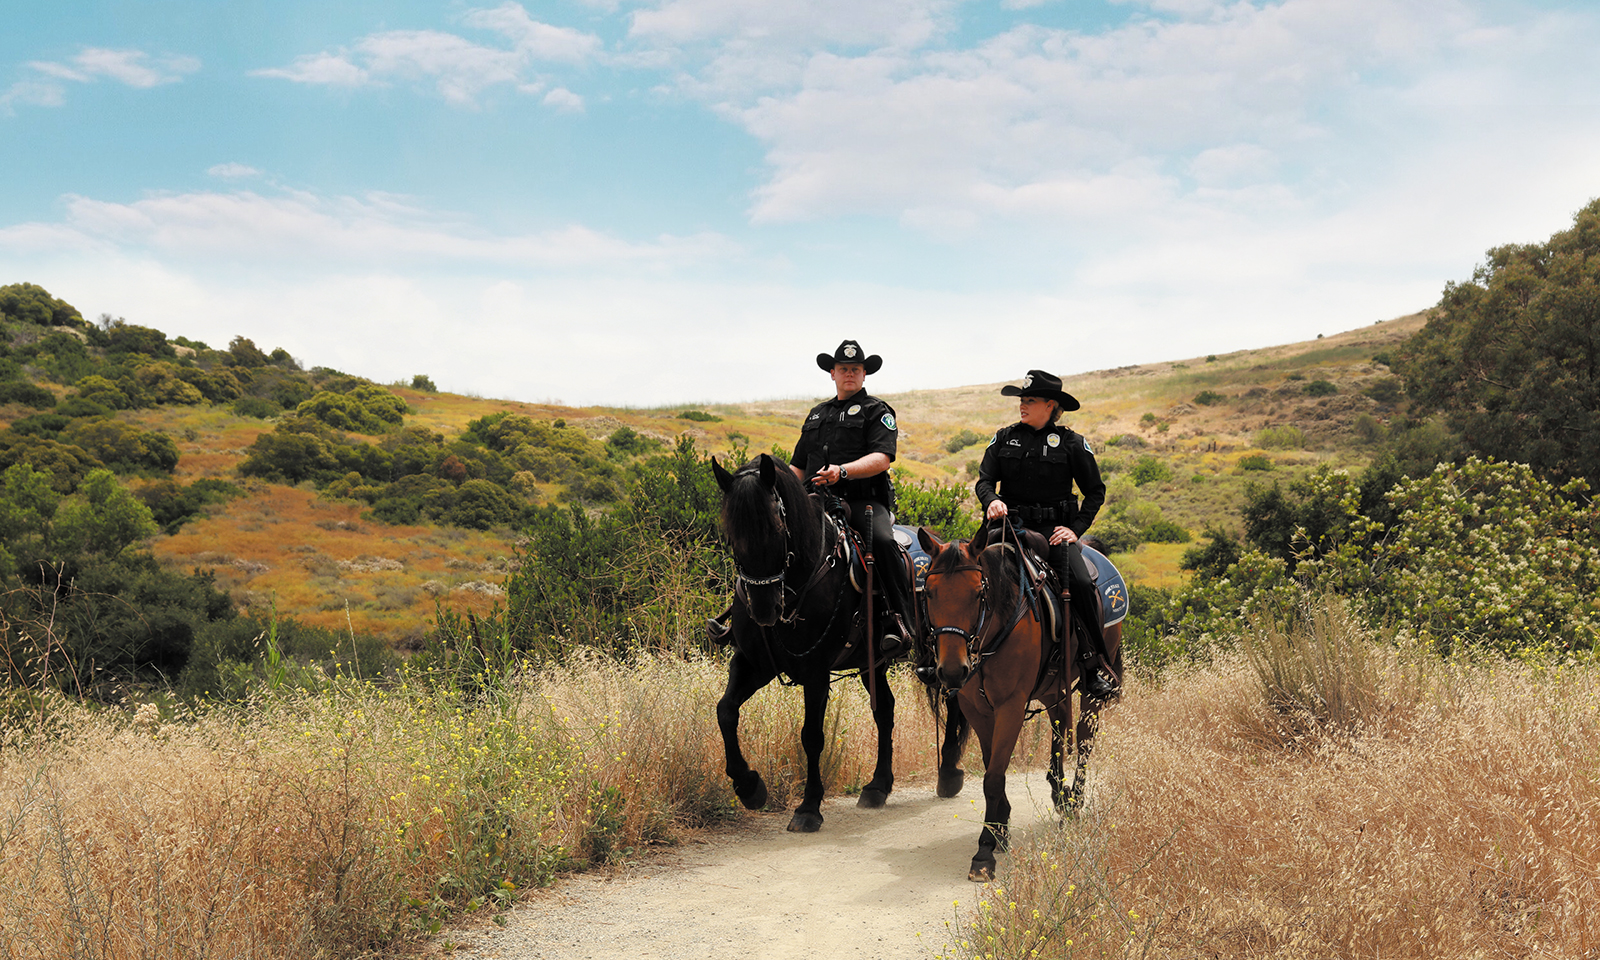 Hit the trail with Irvine’s horse patrol